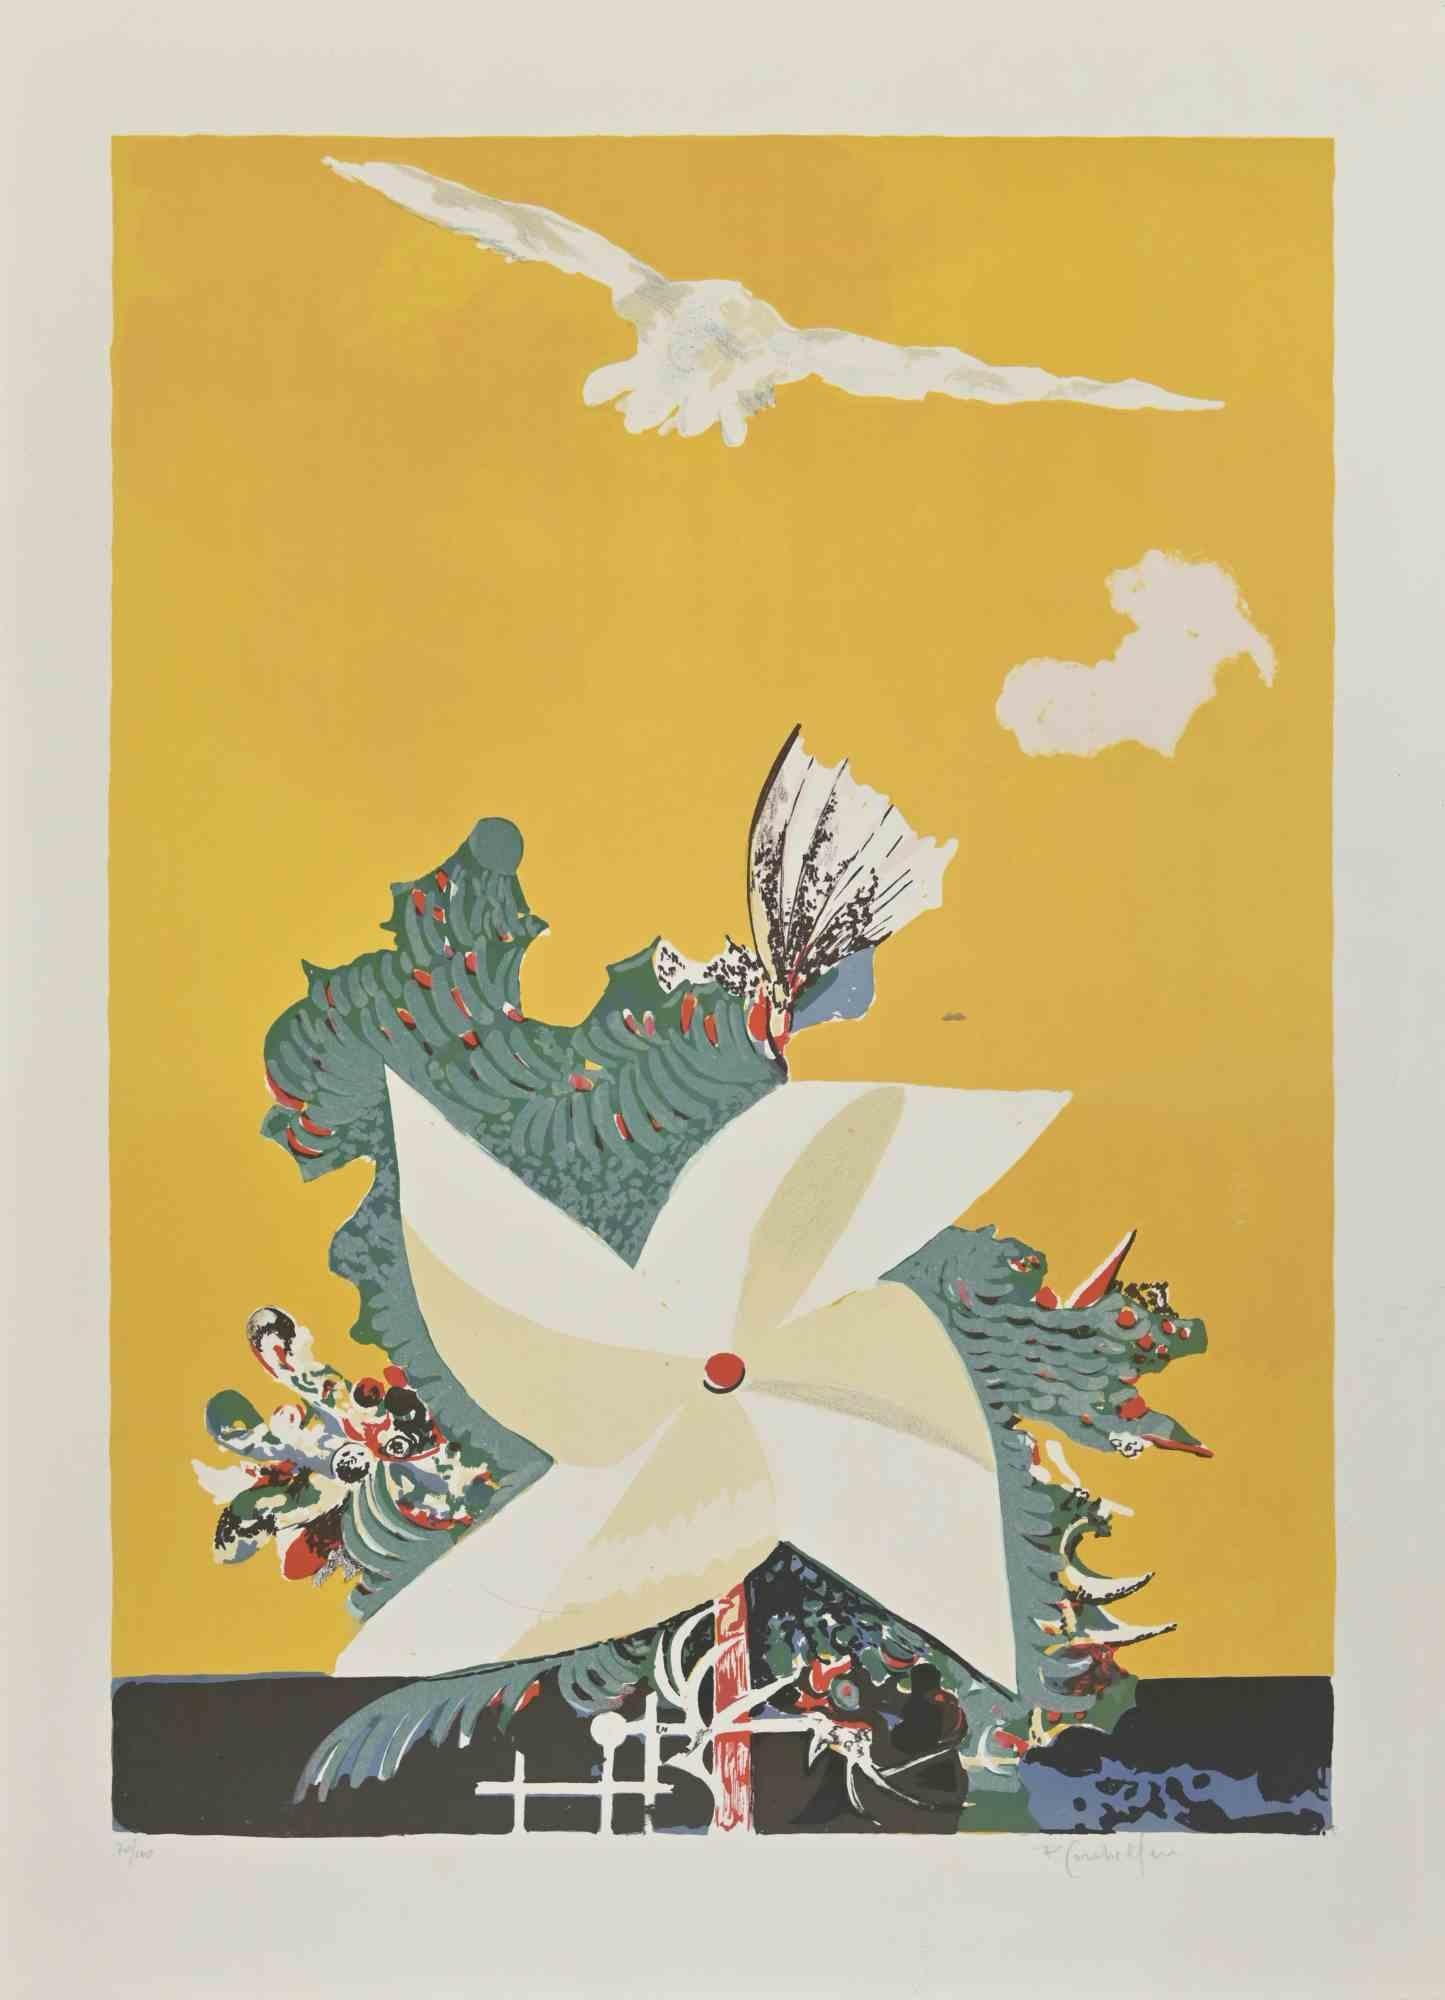 Pinwheel  is a lithograph realized by Pietro Carabellese in 1980.

Hand-signed  on the bottom right. Numbered  on the bottom left 70/100.

Good conditions.

The artwork illustrates a ludic scenery with a pinwheel in the center as the main element